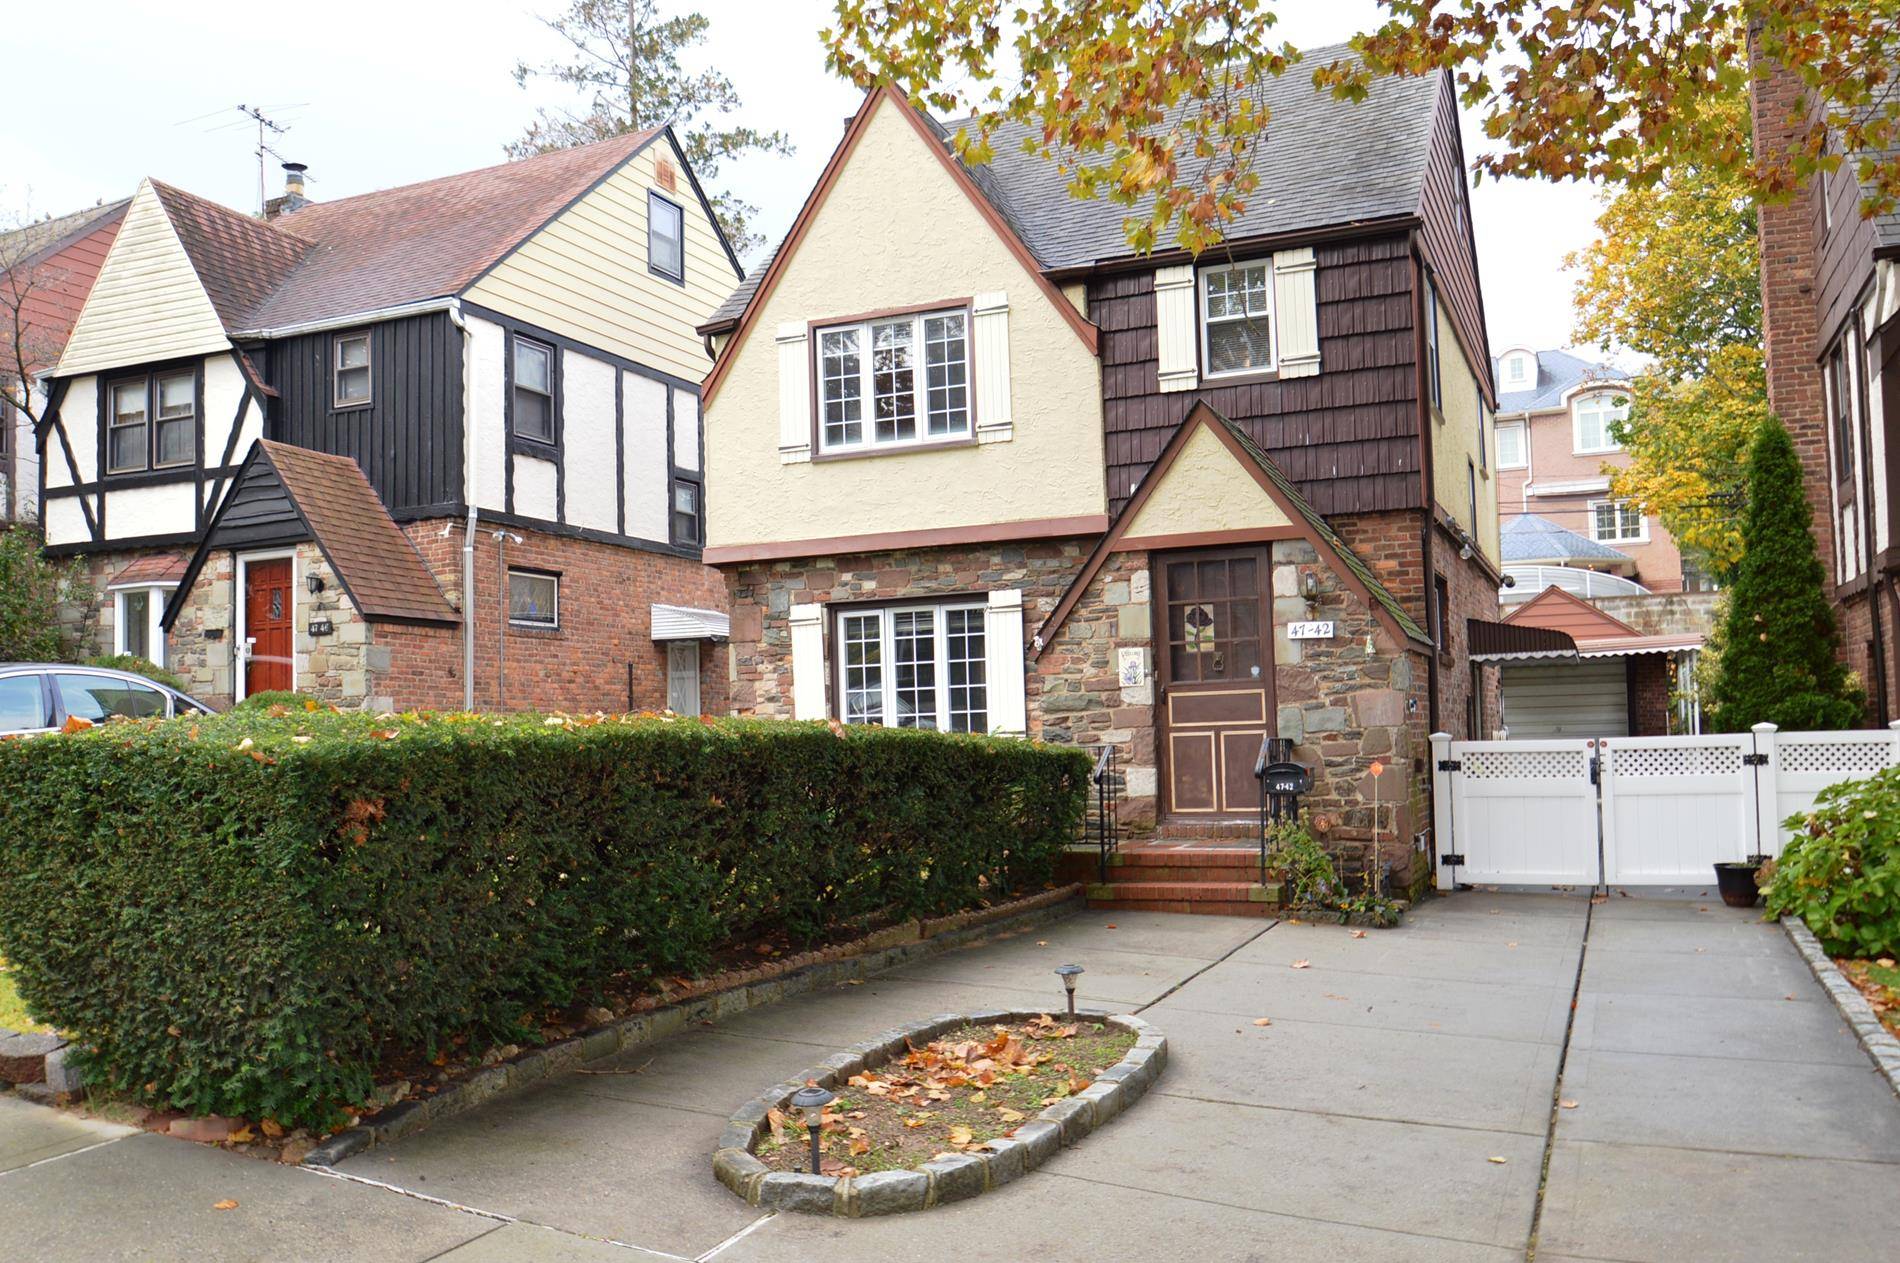 Well maintained 4 bedroom Tudor Colonial on a beautiful tree lined street in desirable Douglaston Park.